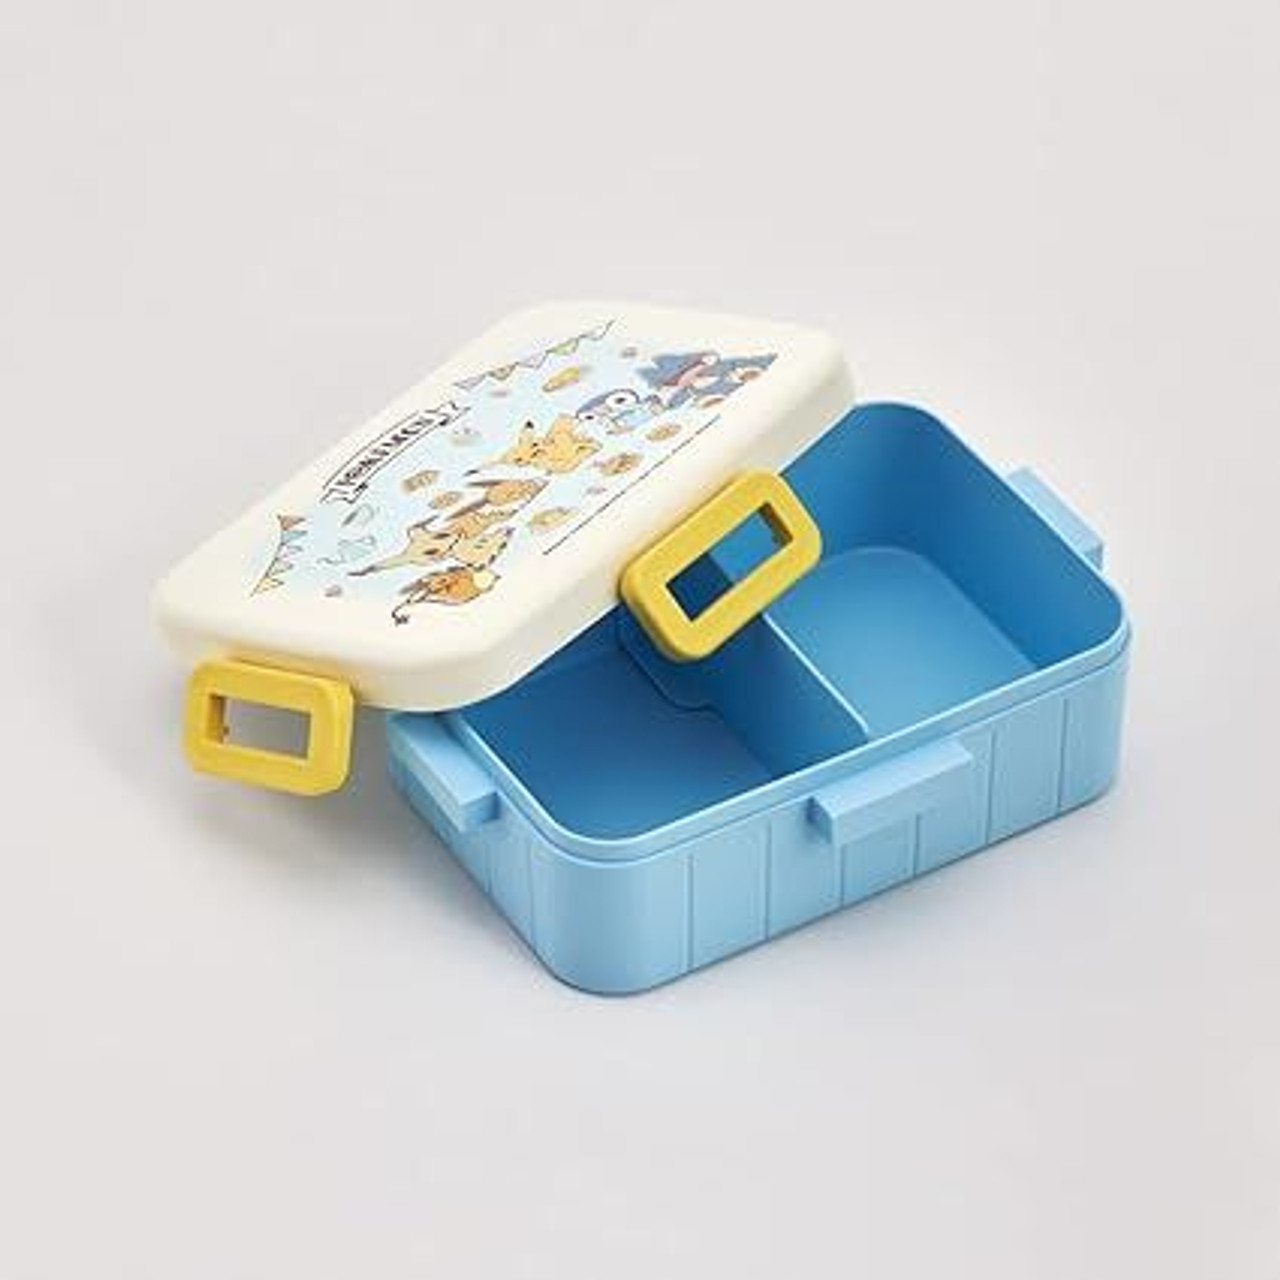 Skater Cinnamoroll Oval Lunch Box 360ml As Shown in Figure One Size